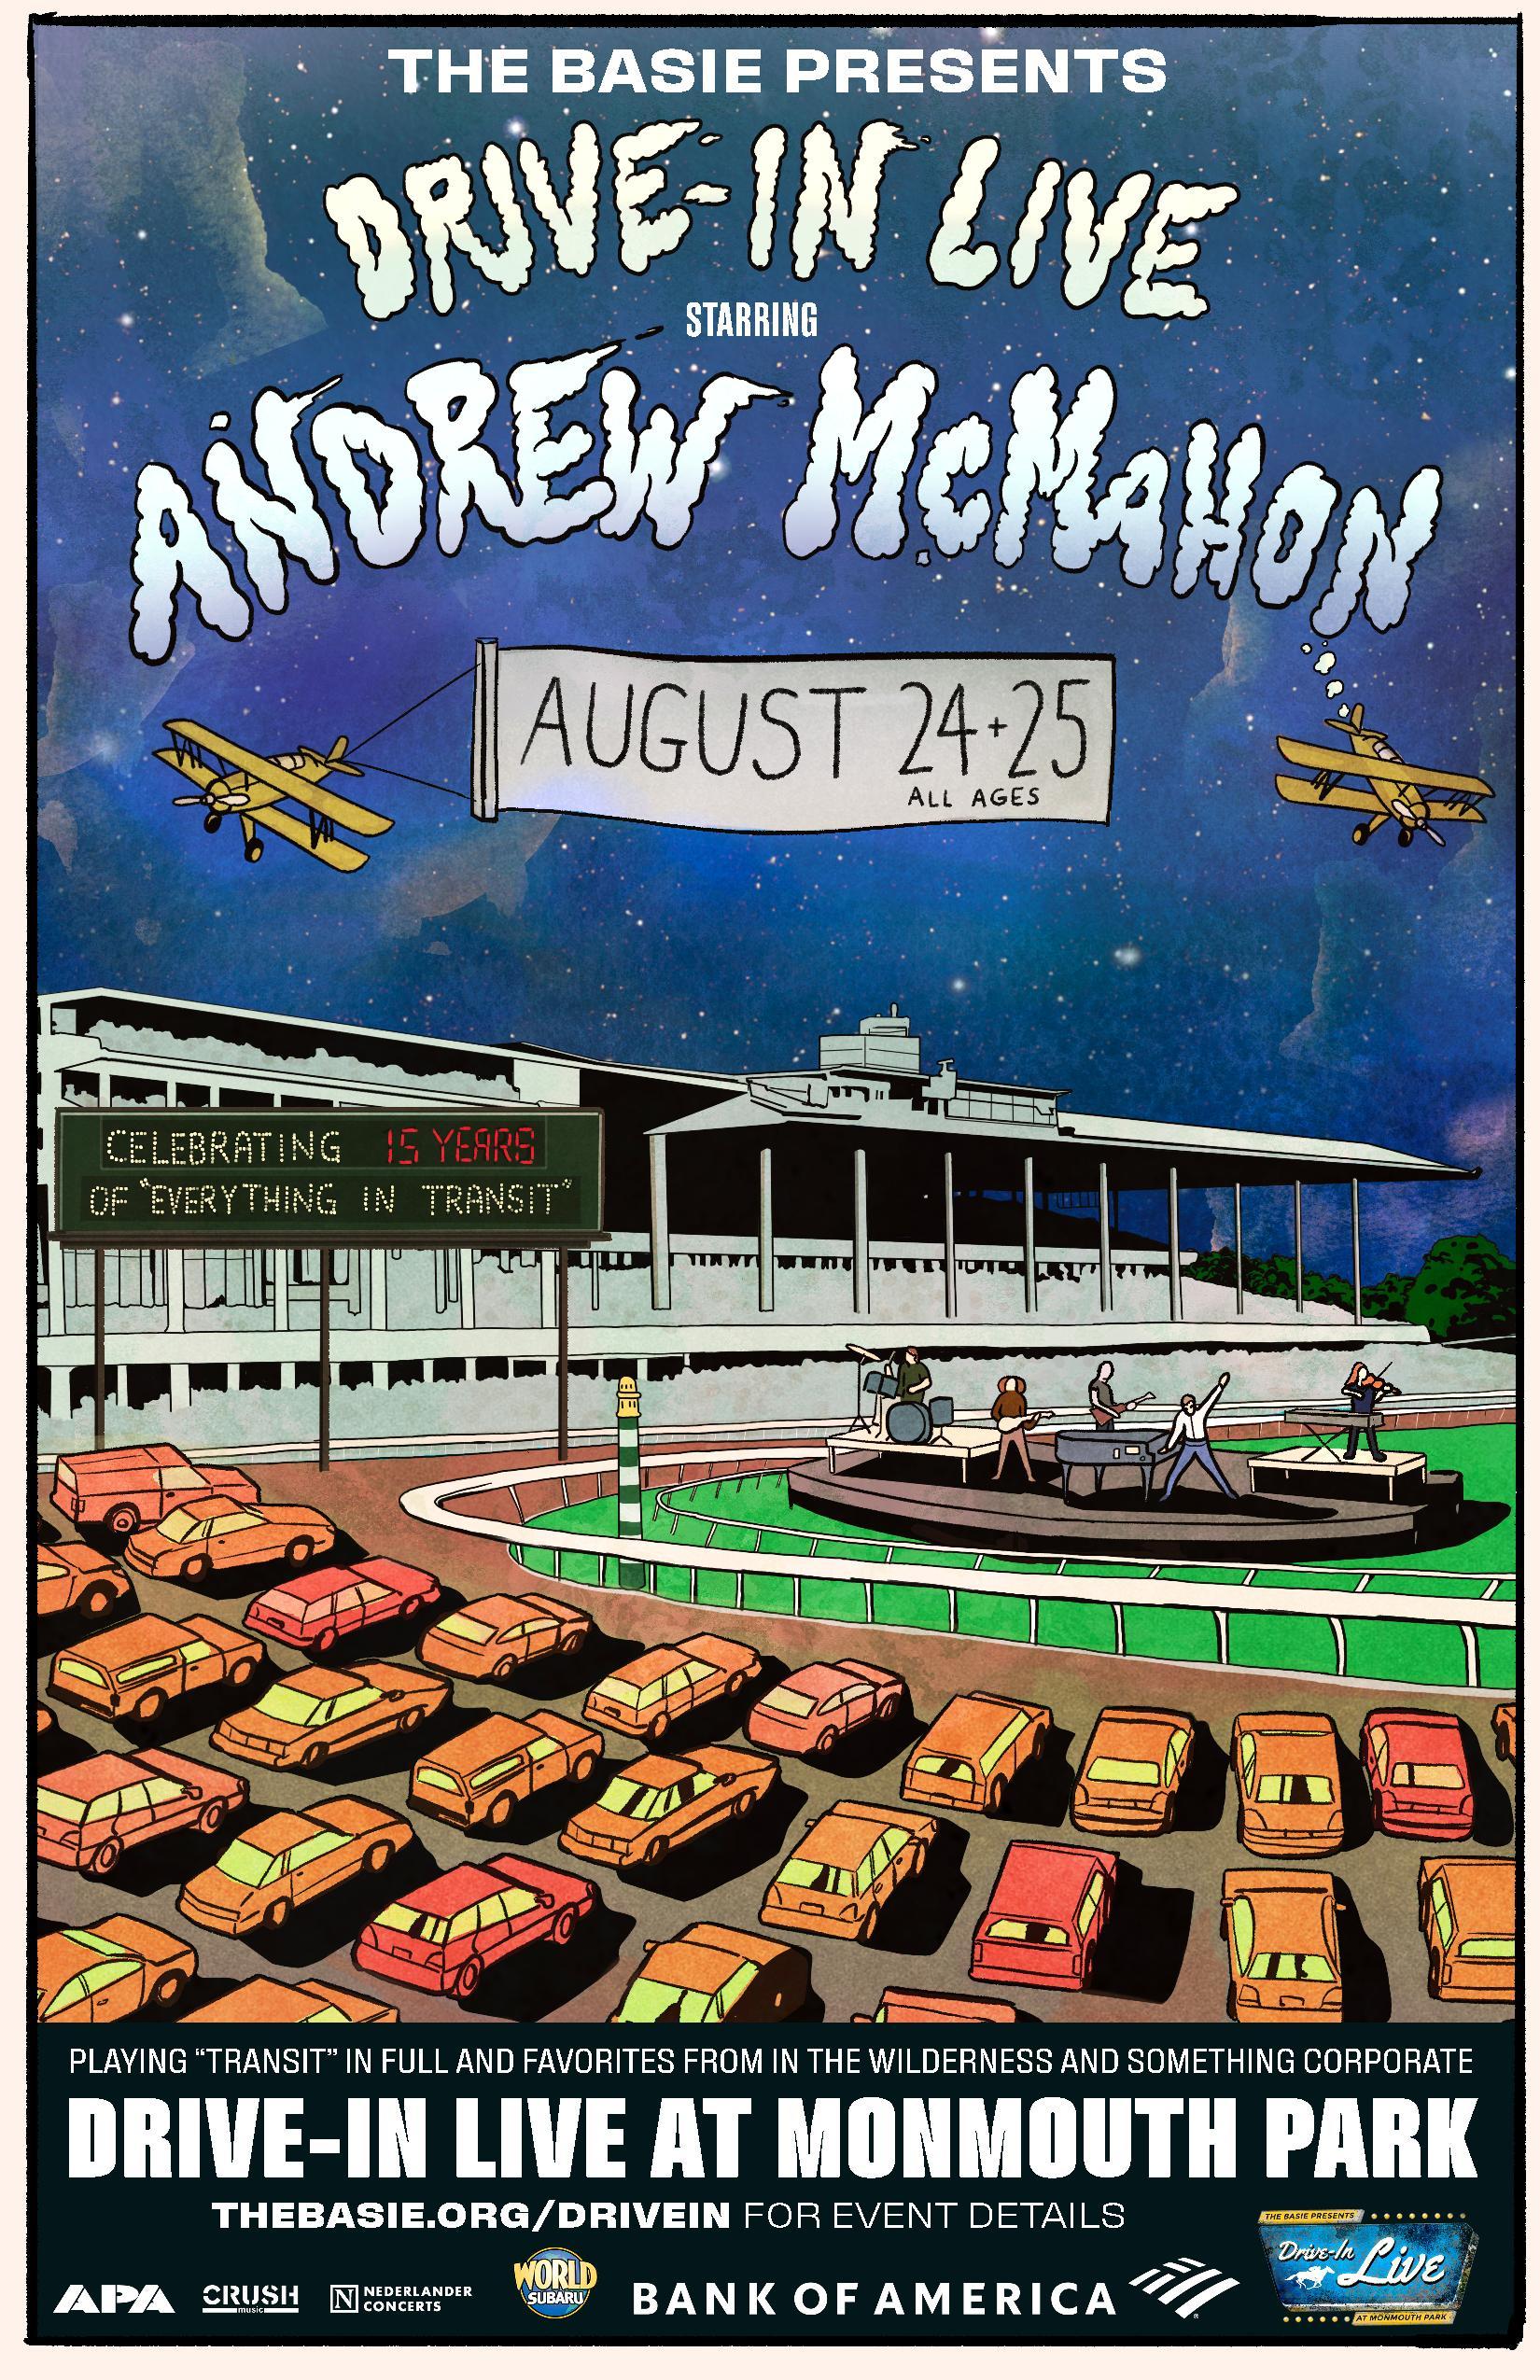 Drive-In Live starring Andrew McMahon @ Monmouth Park